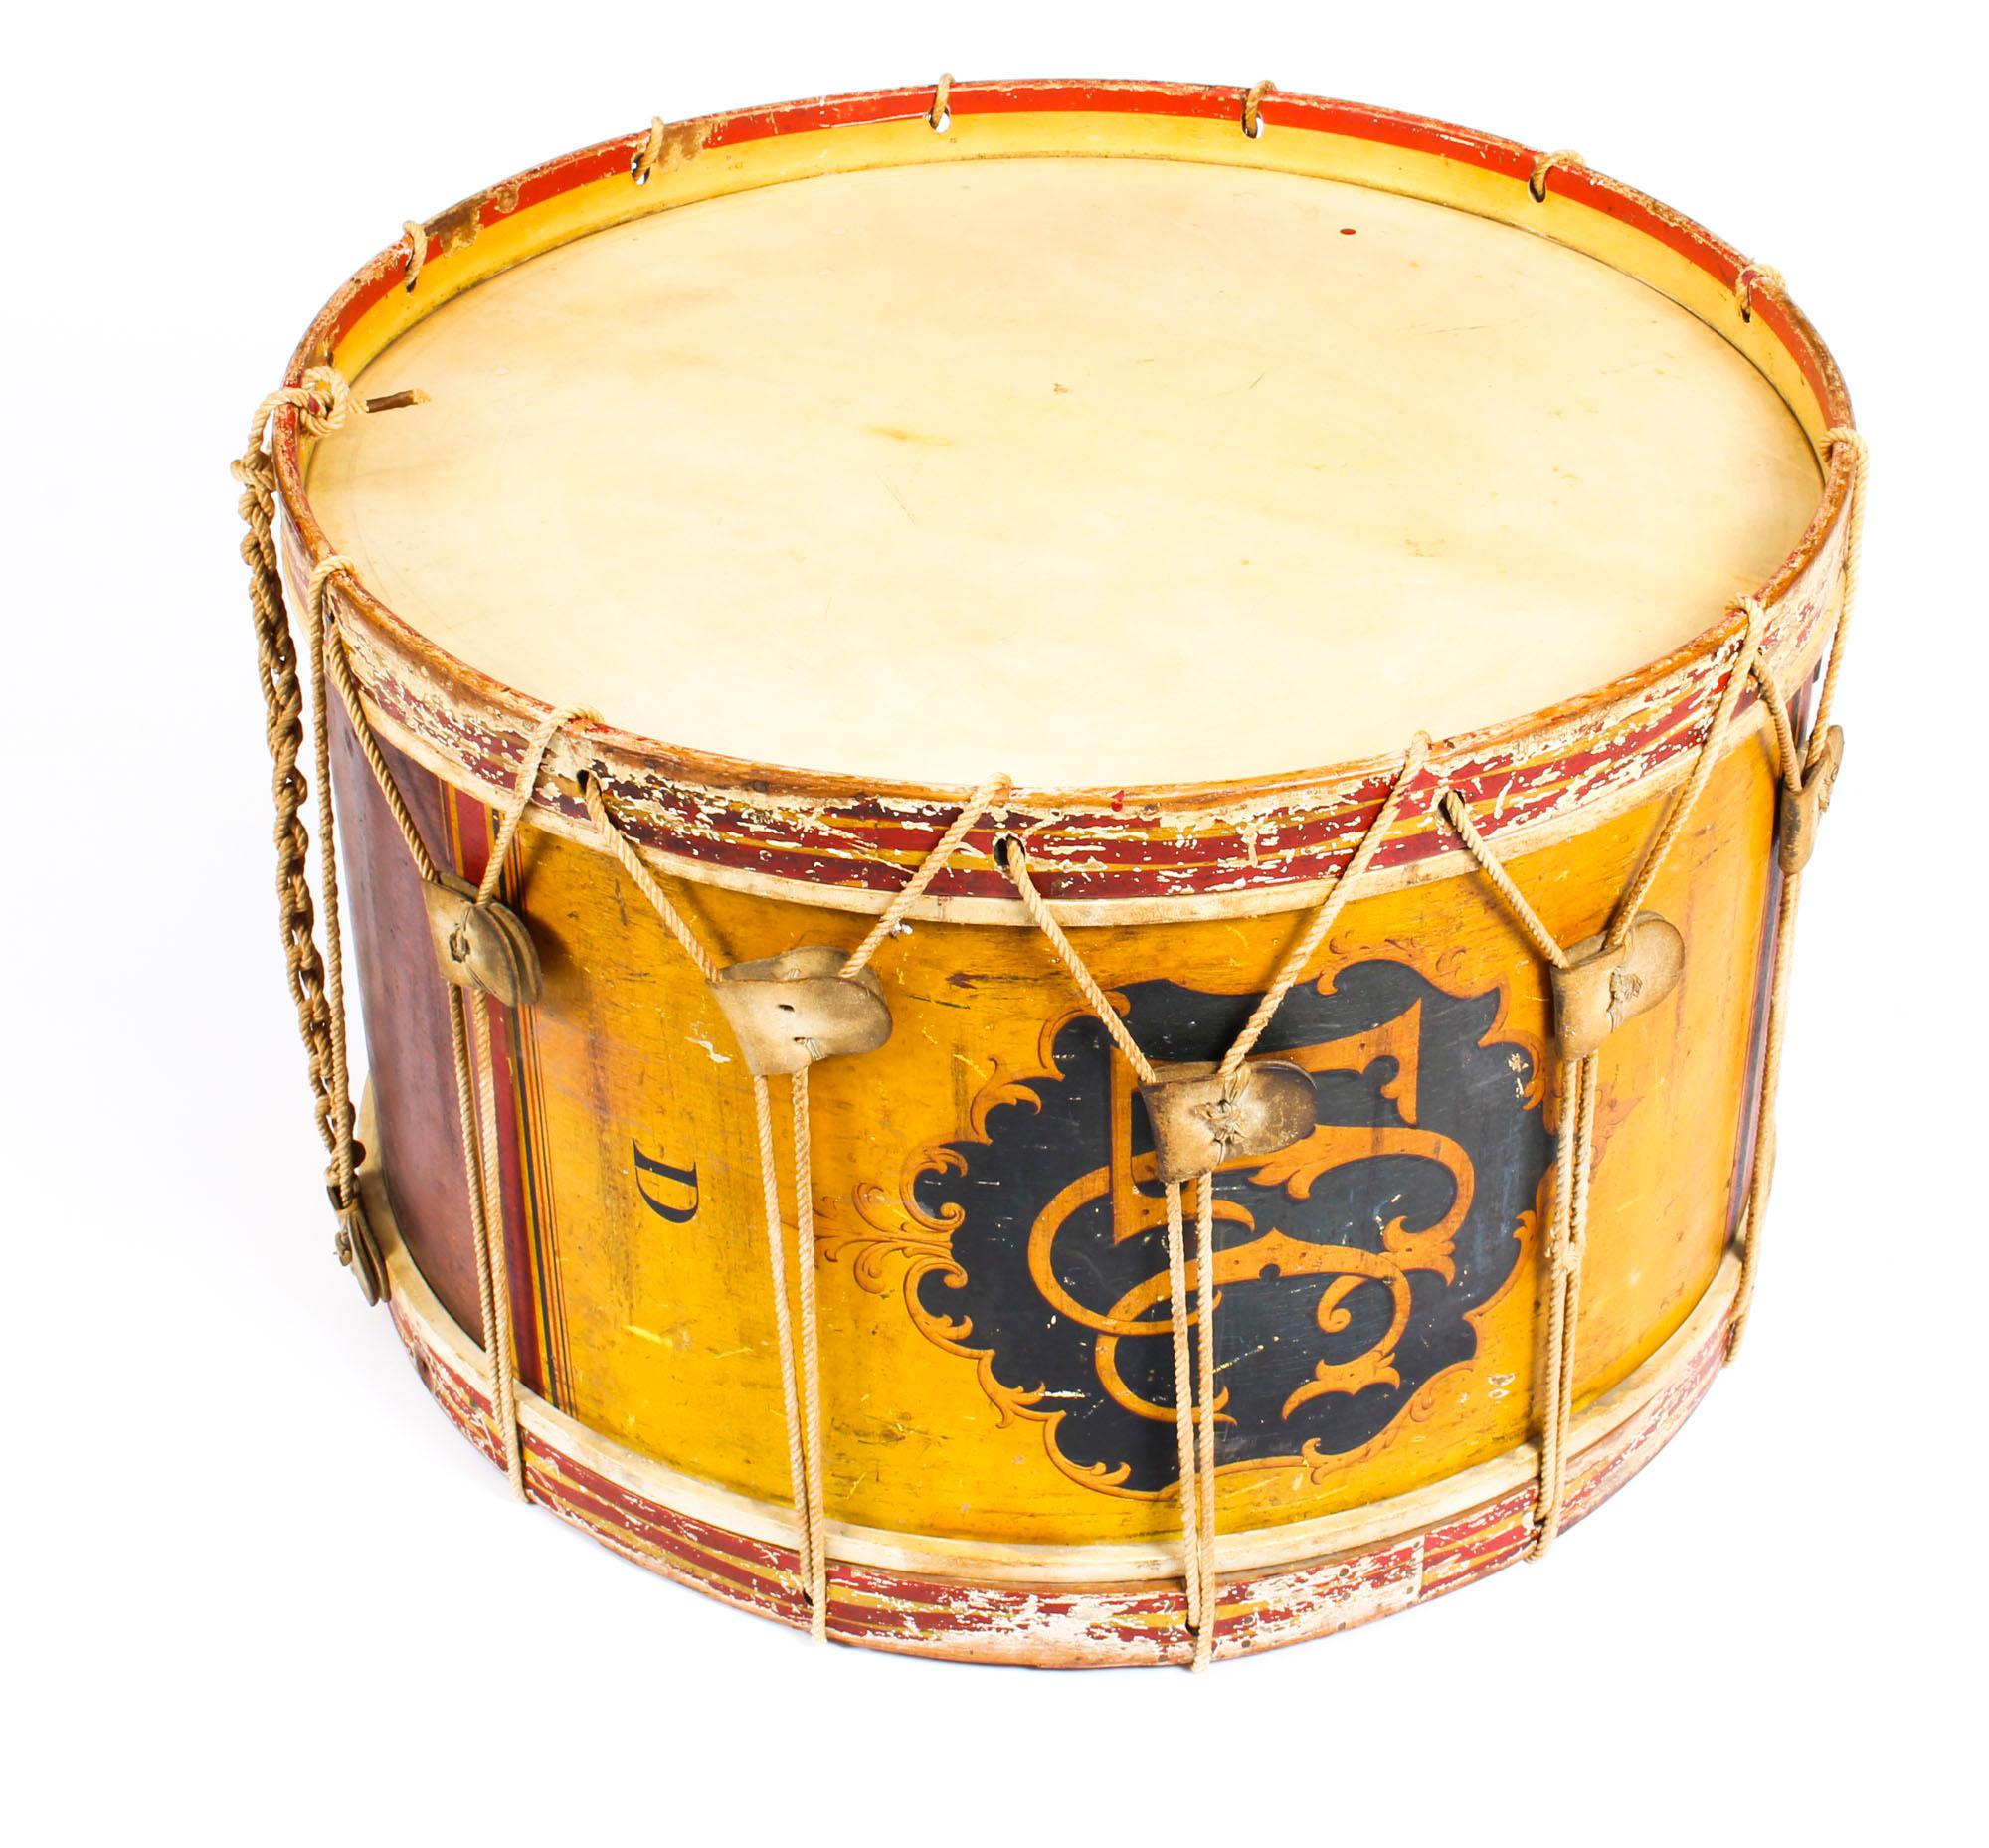 This is a truly magnificent and highly attractive large Victorian military band drum by the world-famous manufacturer of instruments, Hawkes & Son, London, circa 1892 in date. 

This remarkable drum is made of sturdy wood, well-built rope and